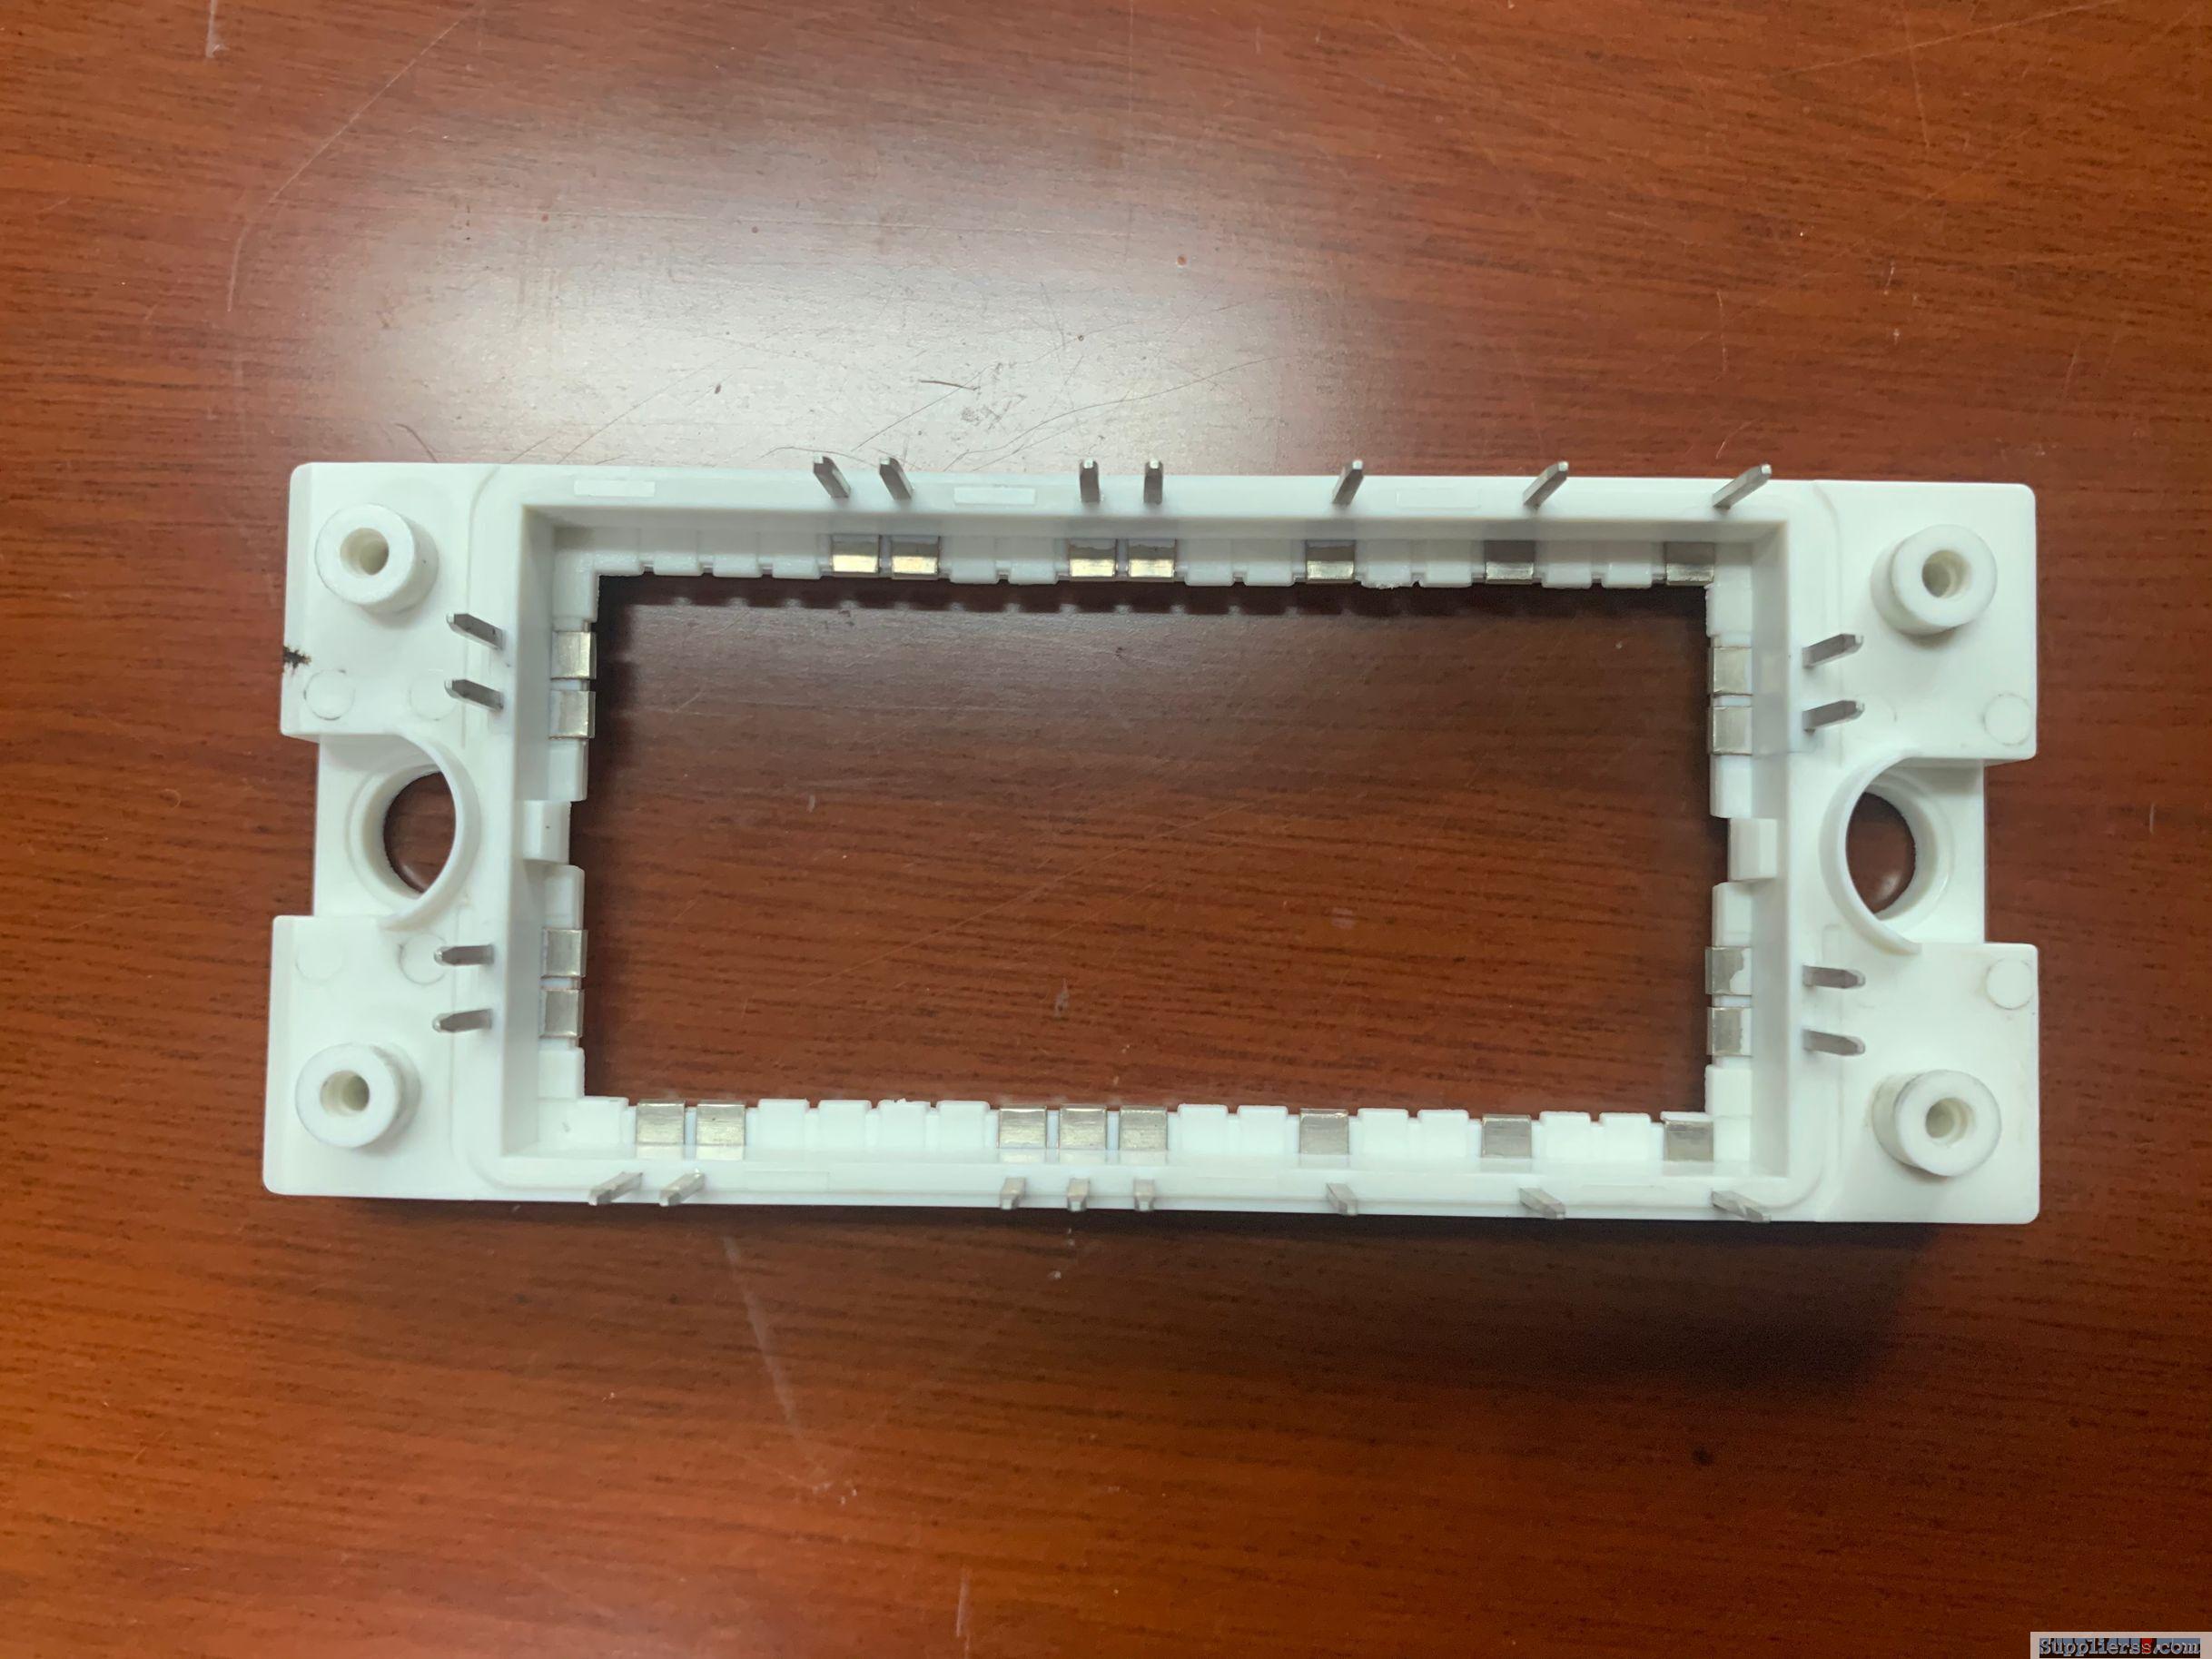 Plastic injection frame with metal inserts